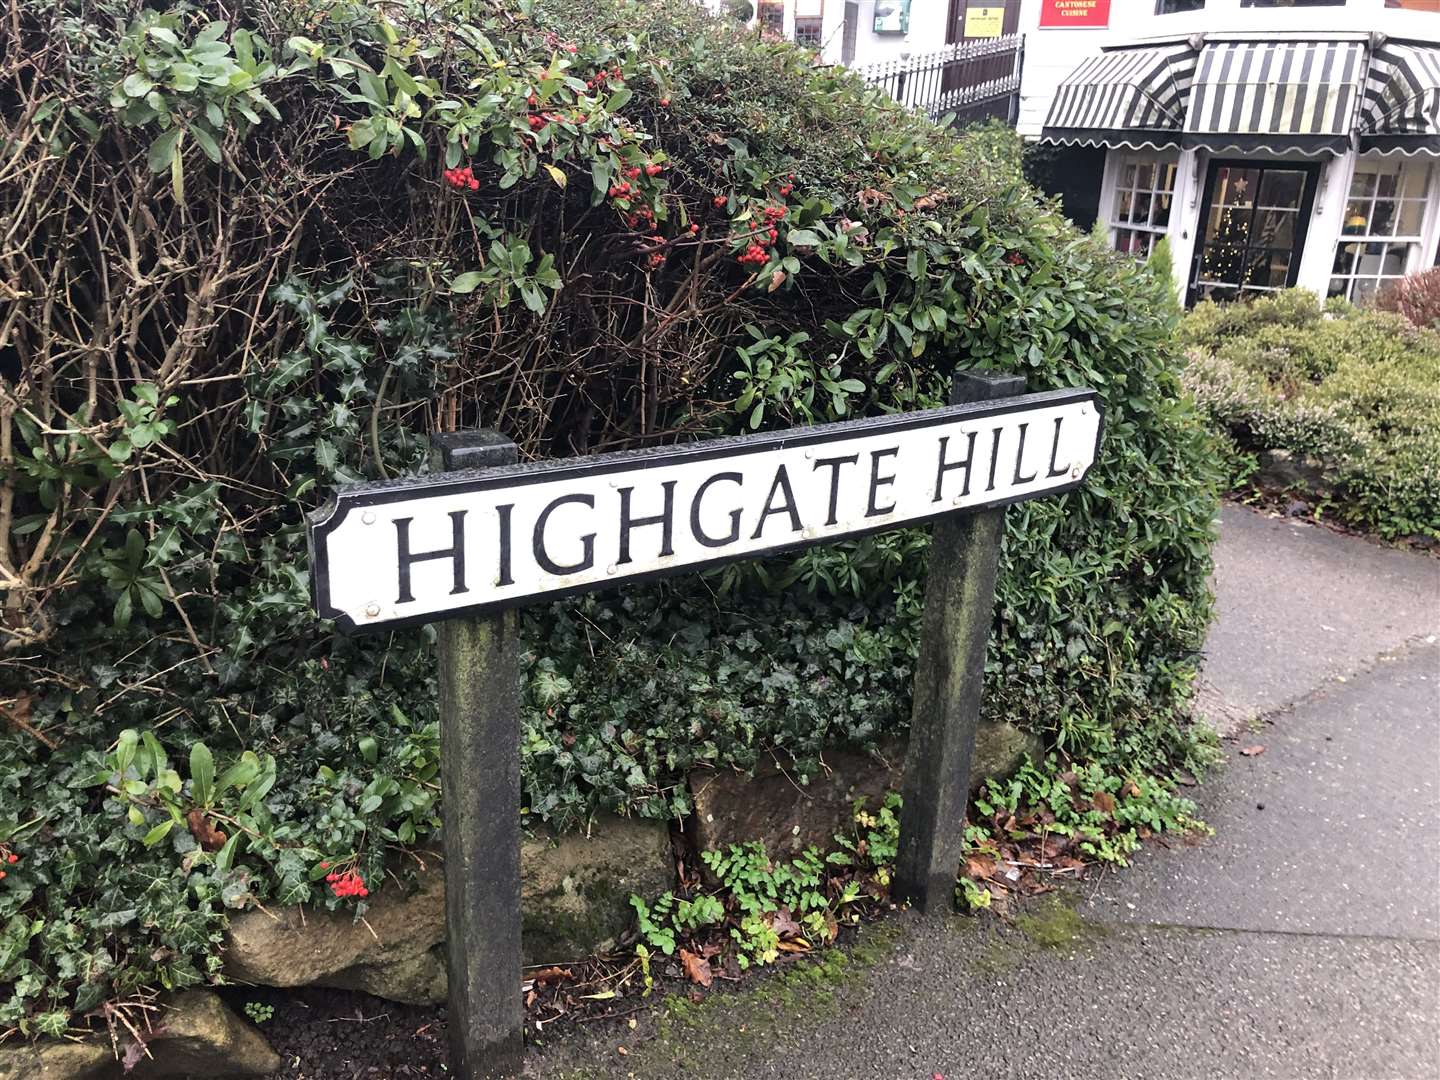 Access would be from Highgate Hill